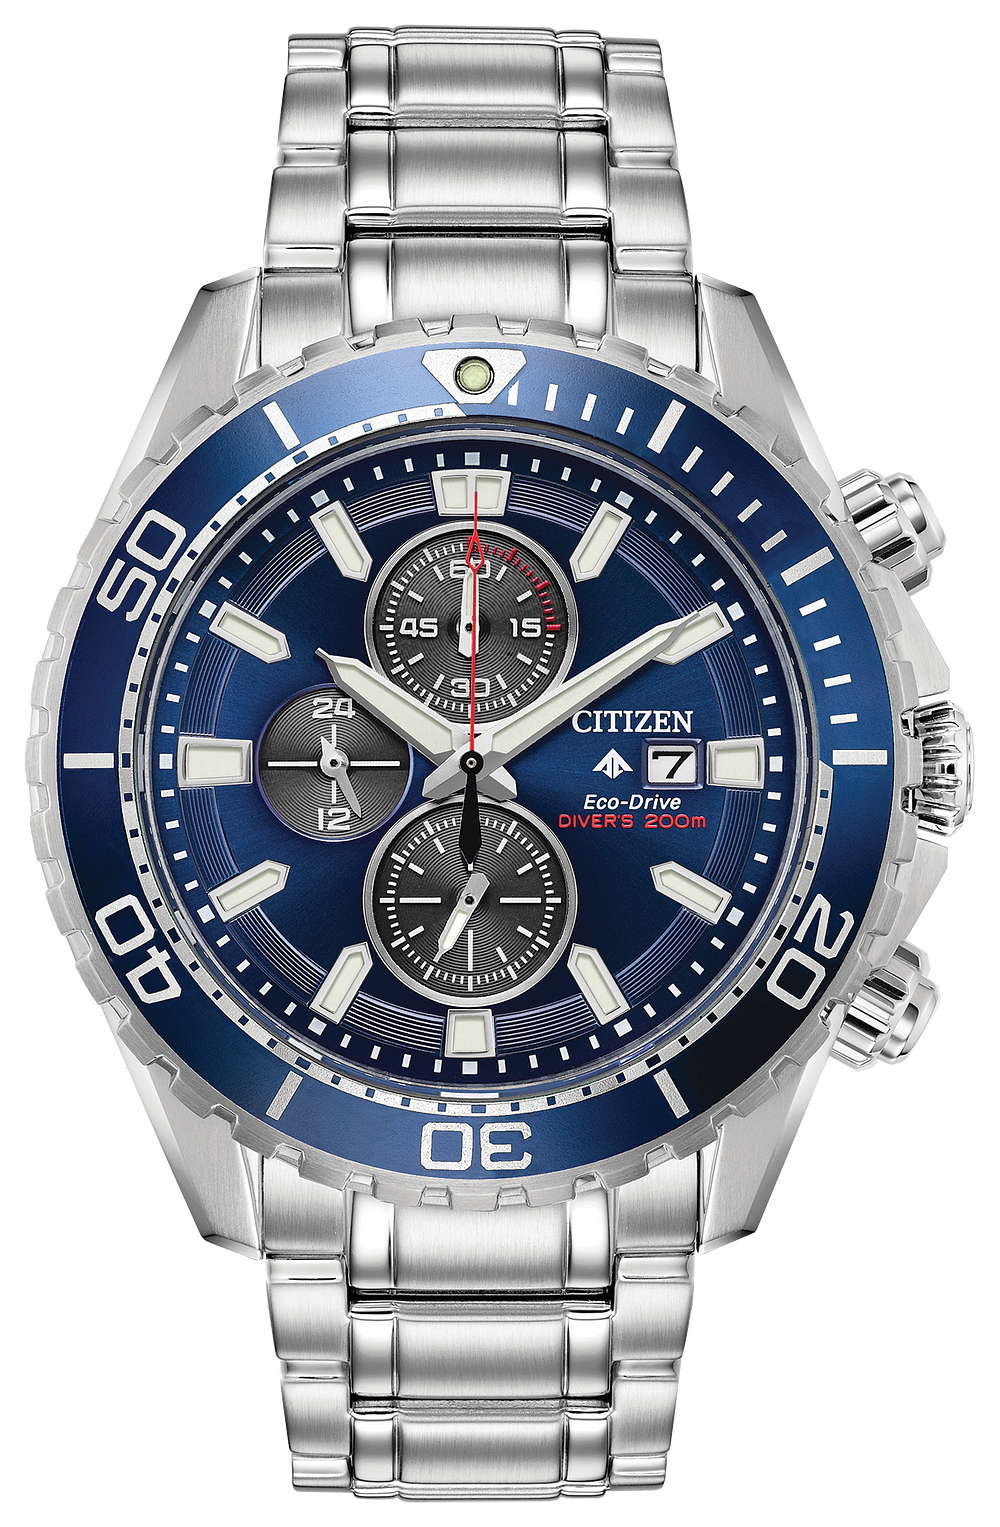 NEW and UPCOMING Citizen Watches ** | Page 19 | WatchUSeek Watch